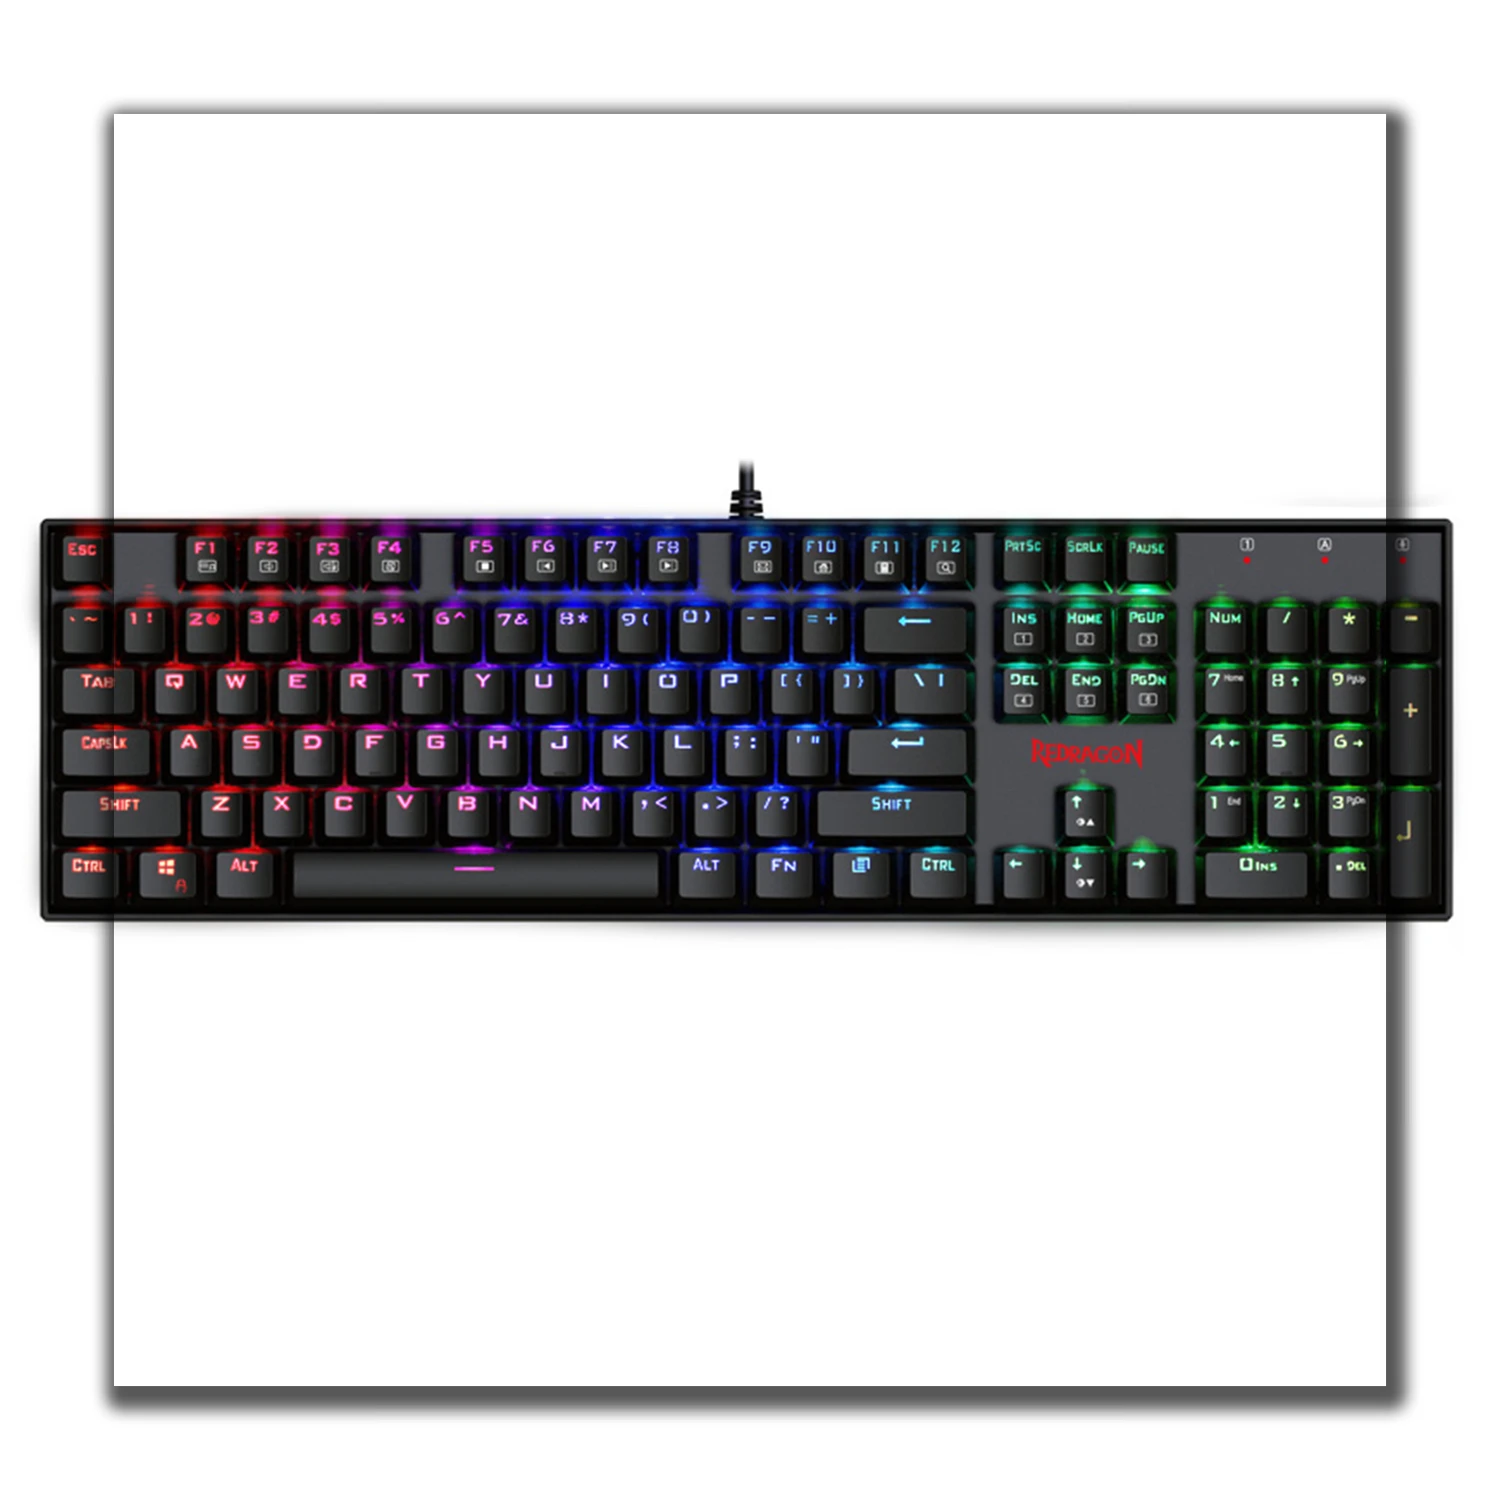 REDRAGON K551 Mechanical Gaming Keyboard 104 Keys RGB Backlit USB Wired Keyboard with Blue Switches for Windows Gaming PC Laptop